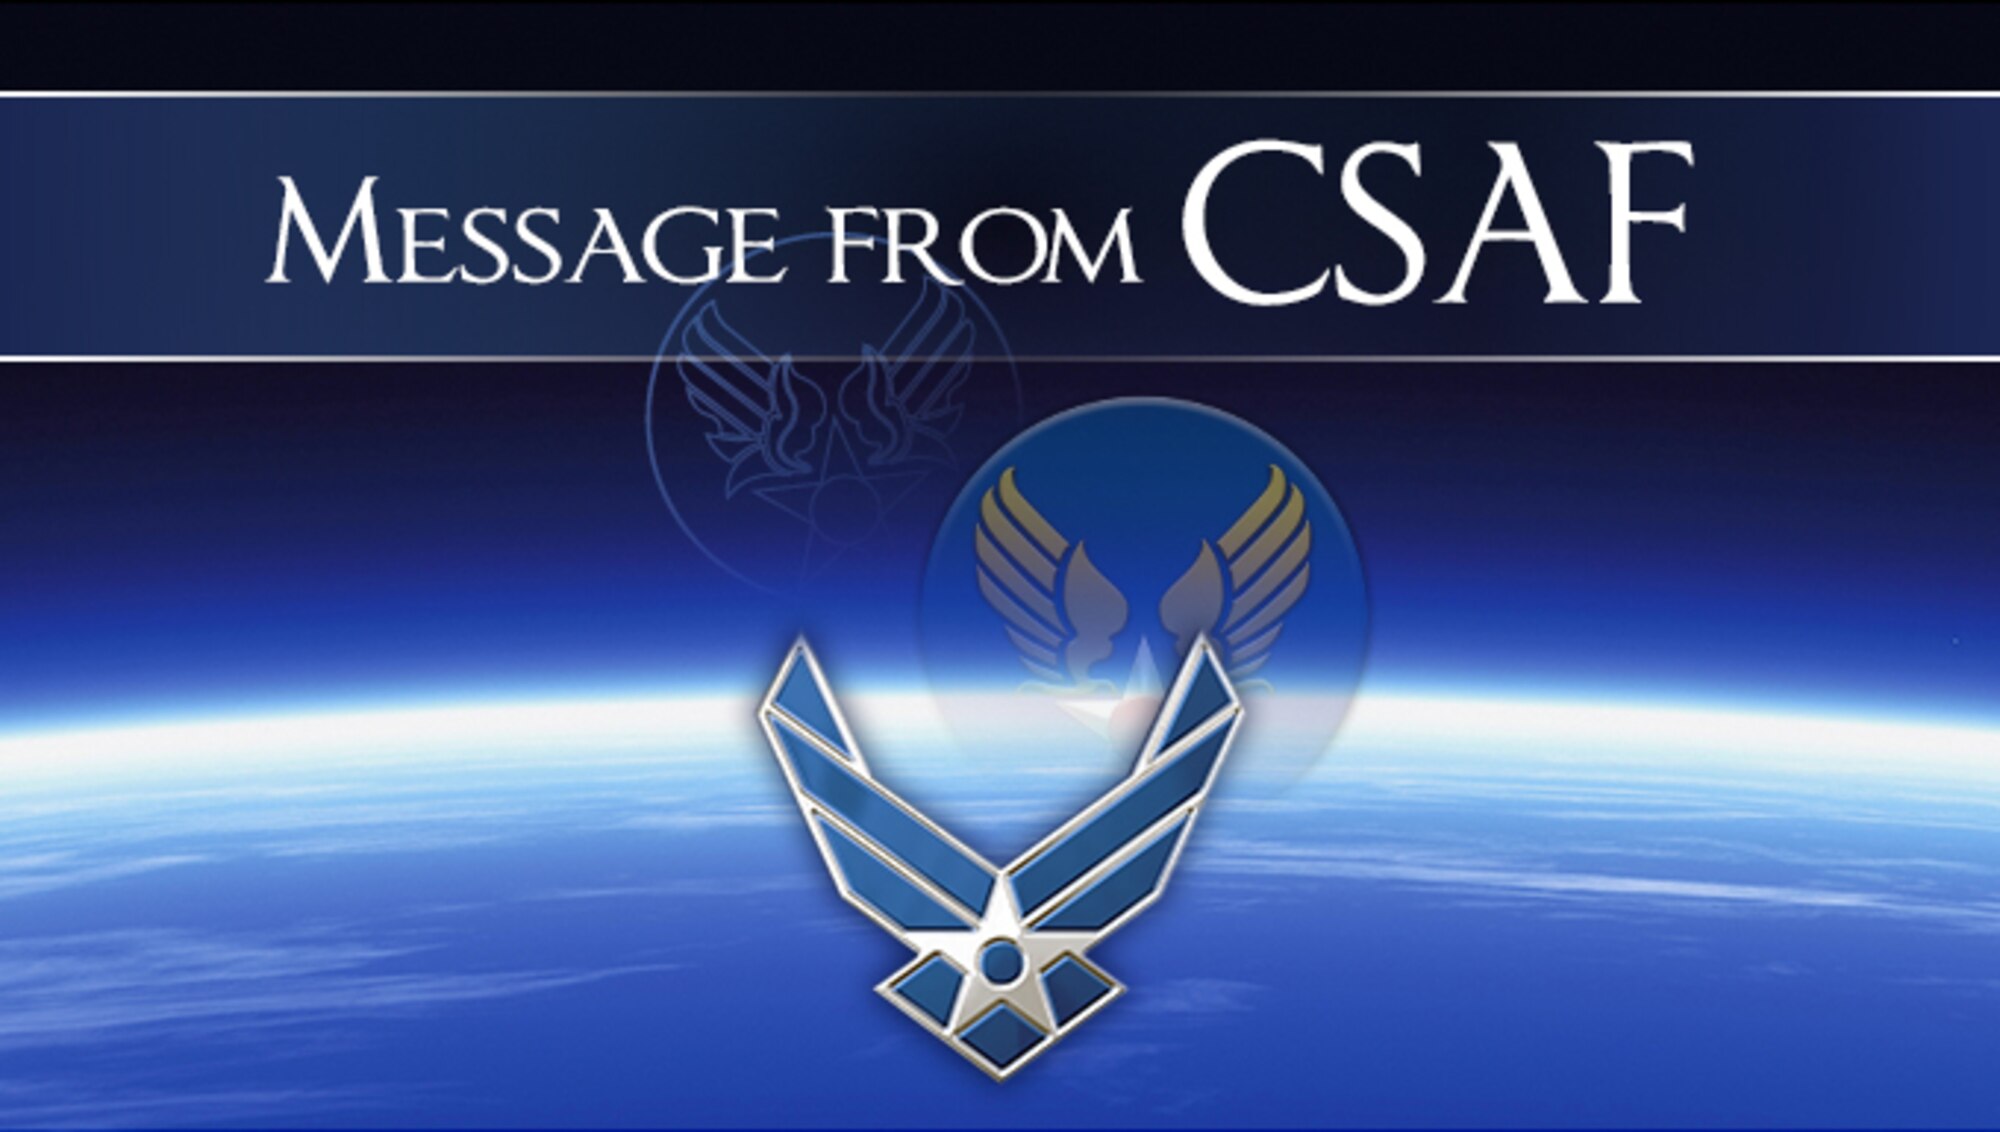 Message from CSAF